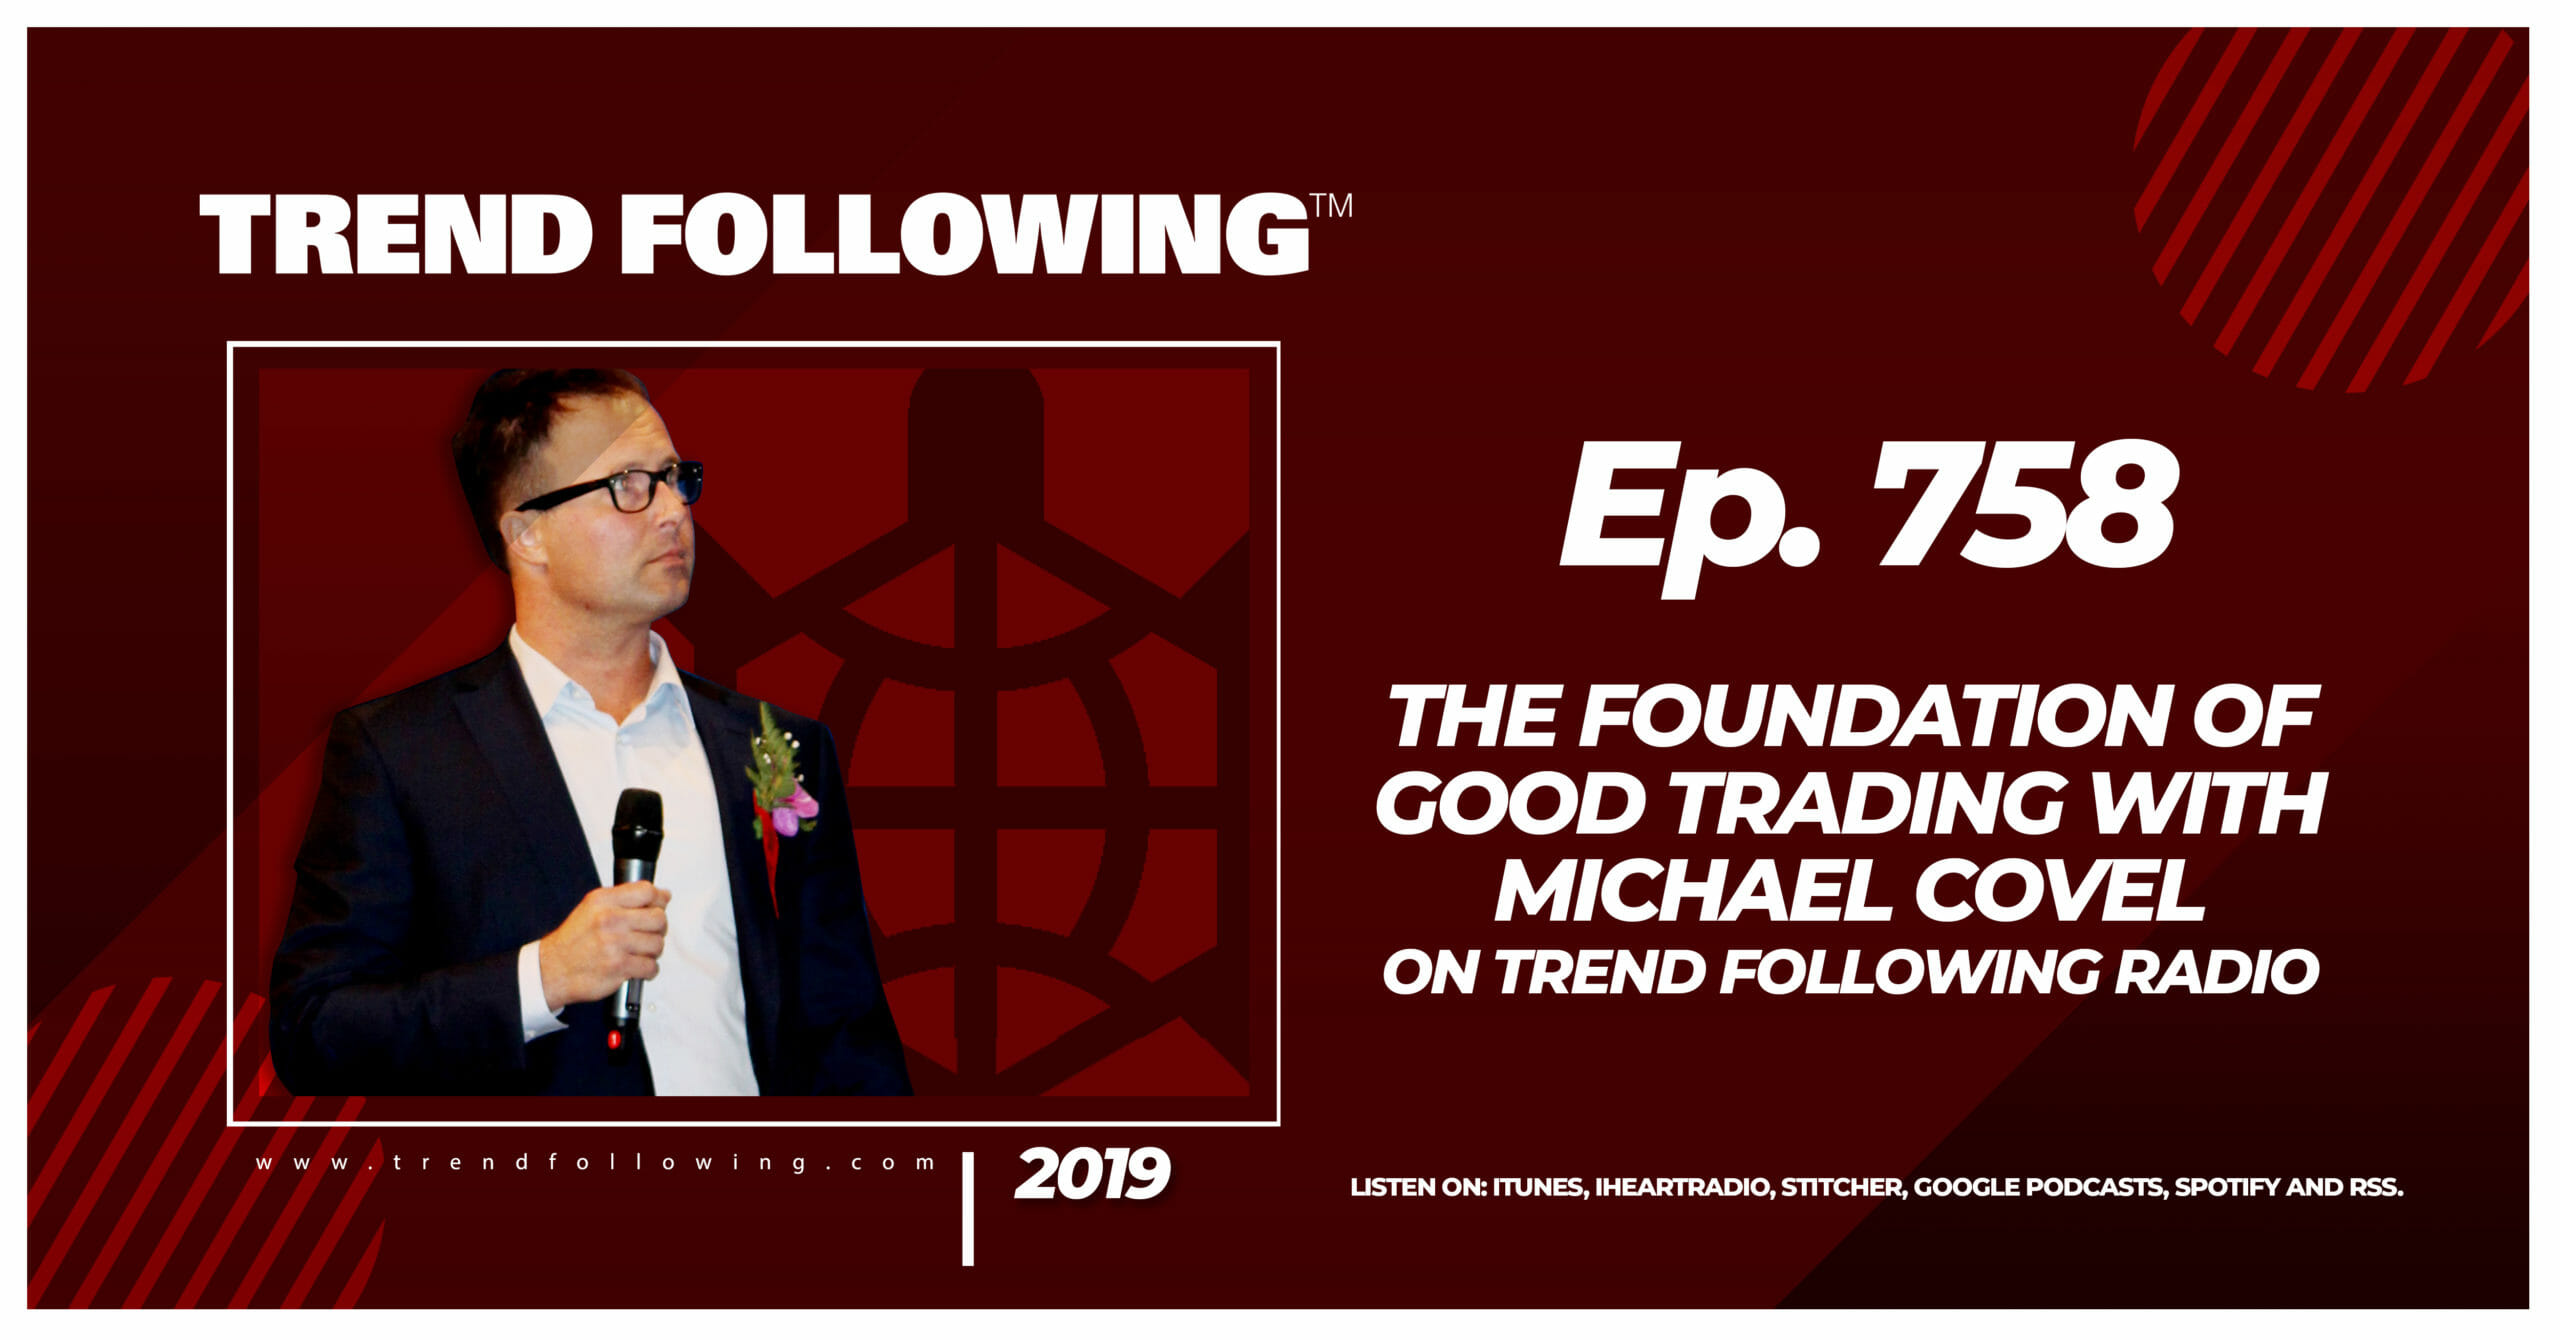 The Foundation of Good Trading with Michael Covel